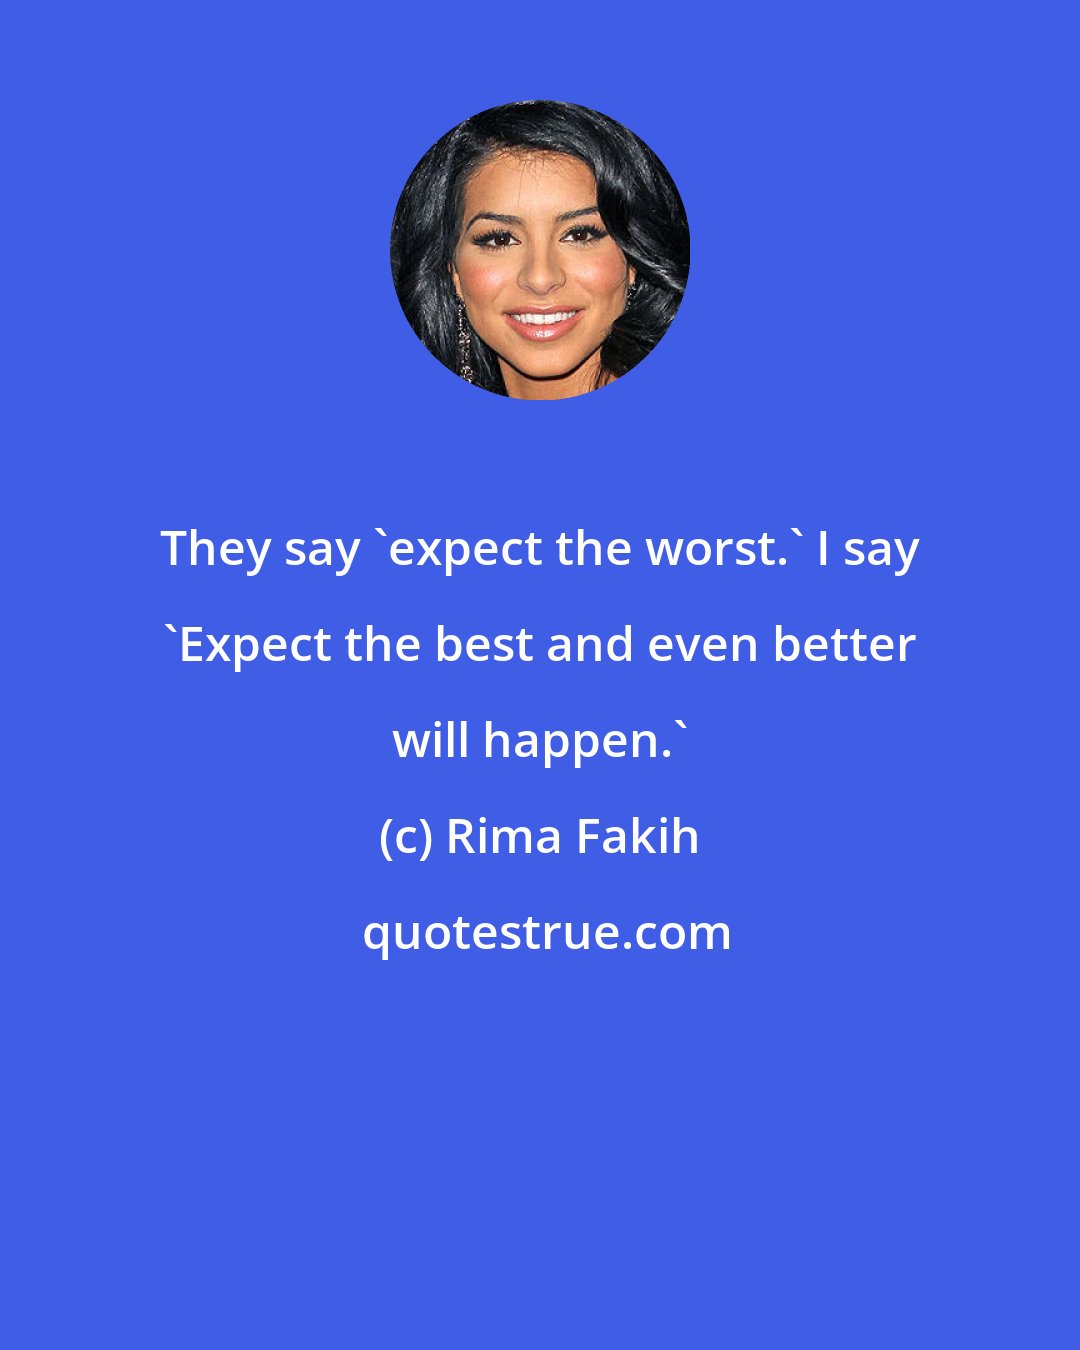 Rima Fakih: They say 'expect the worst.' I say 'Expect the best and even better will happen.'